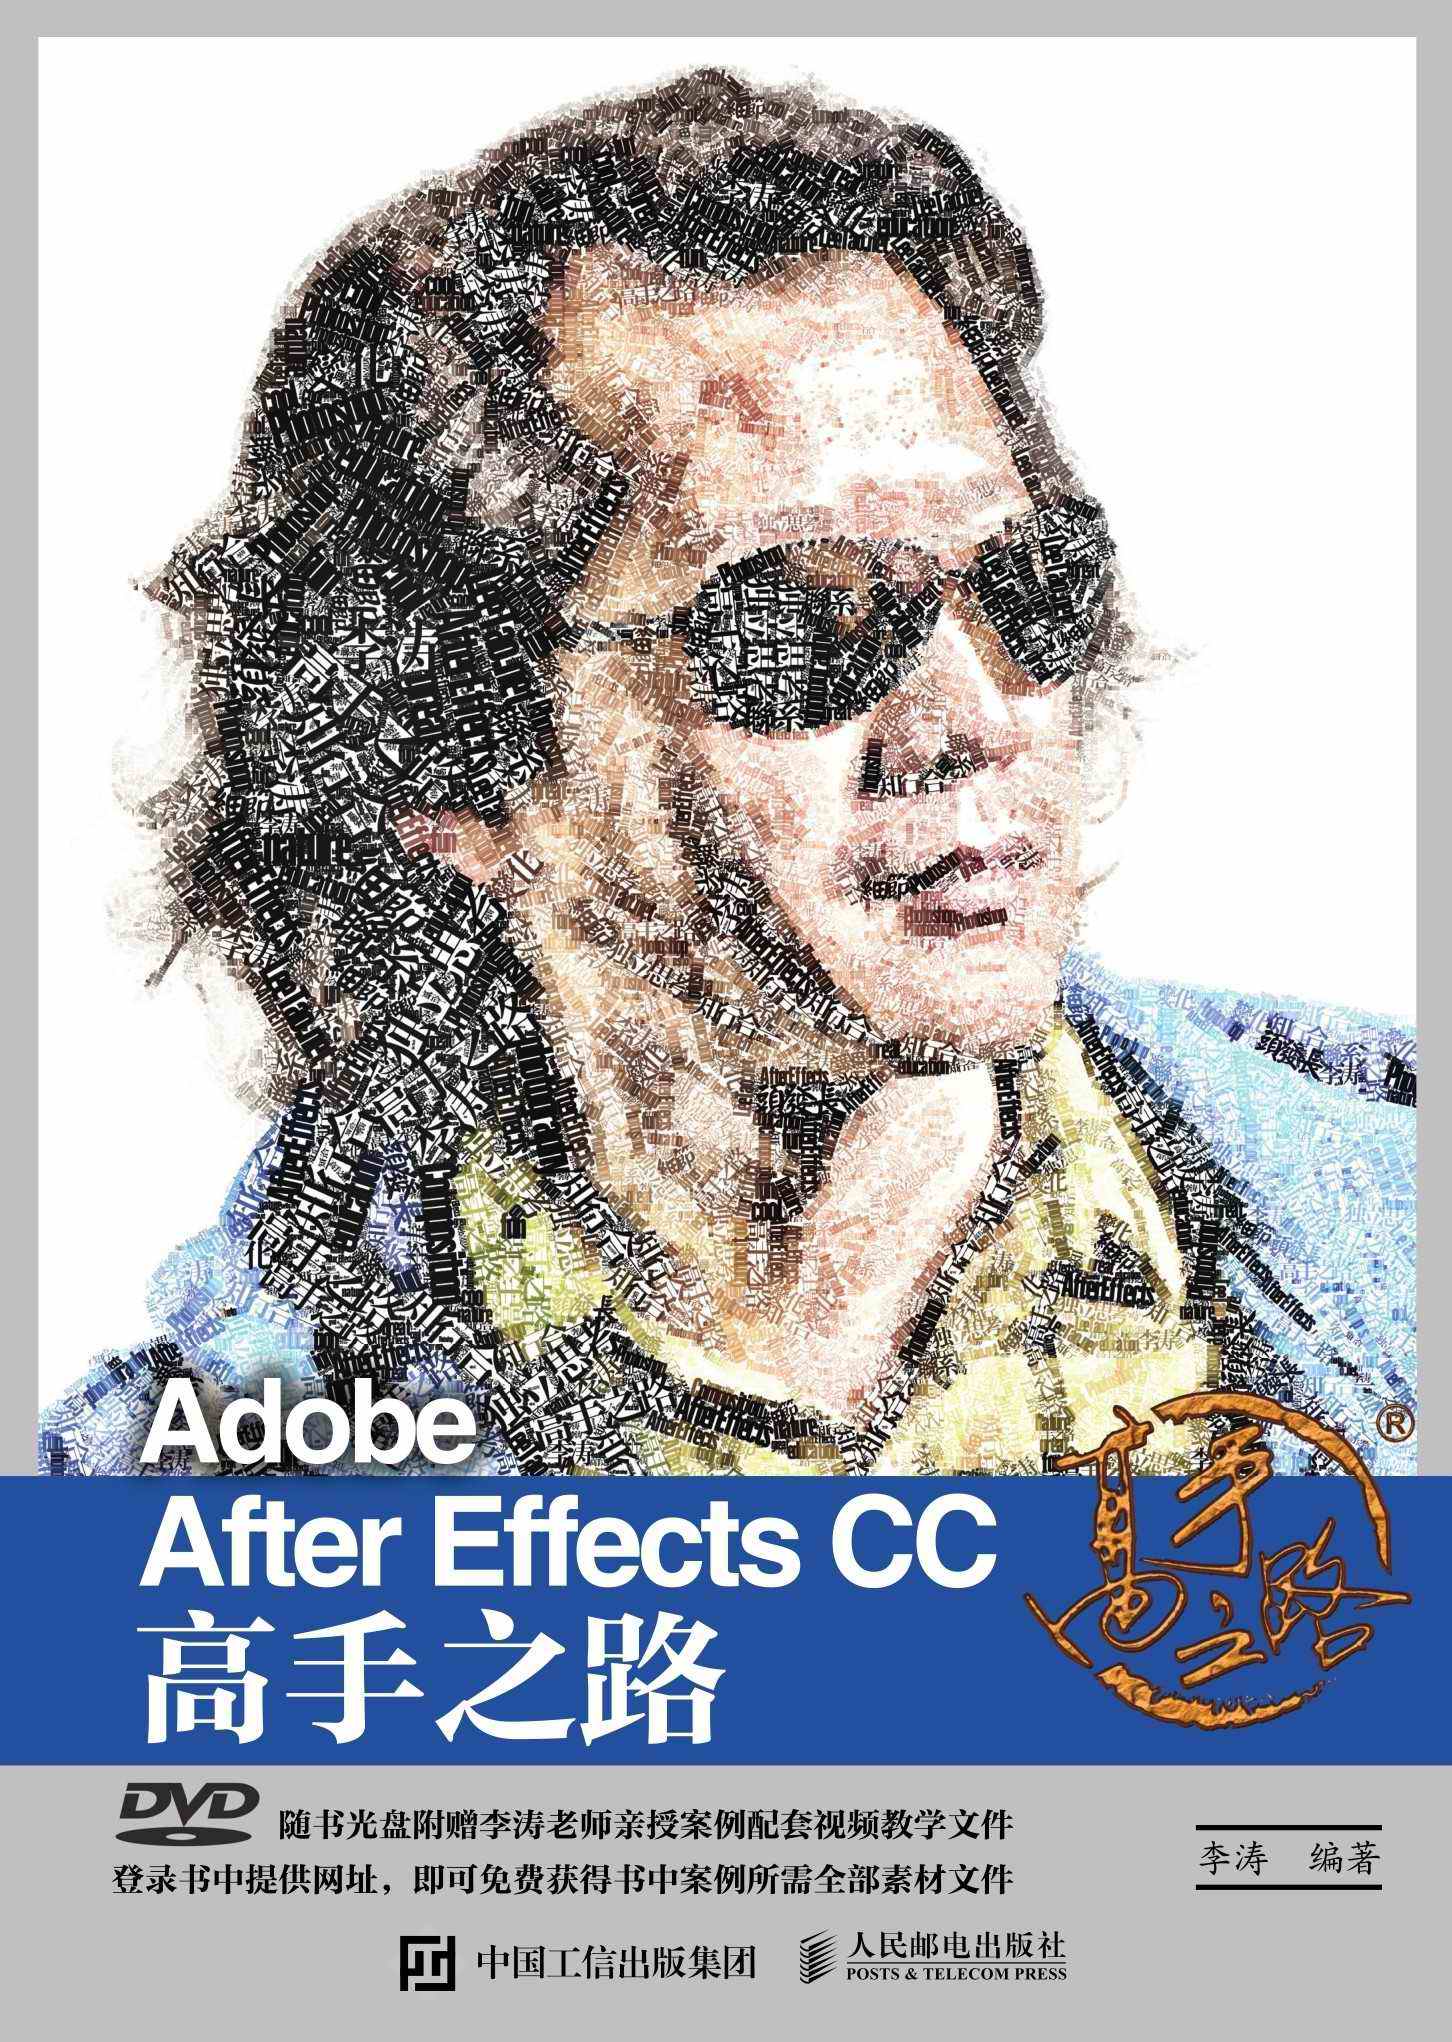 Adobe After Effects CC 高手之路